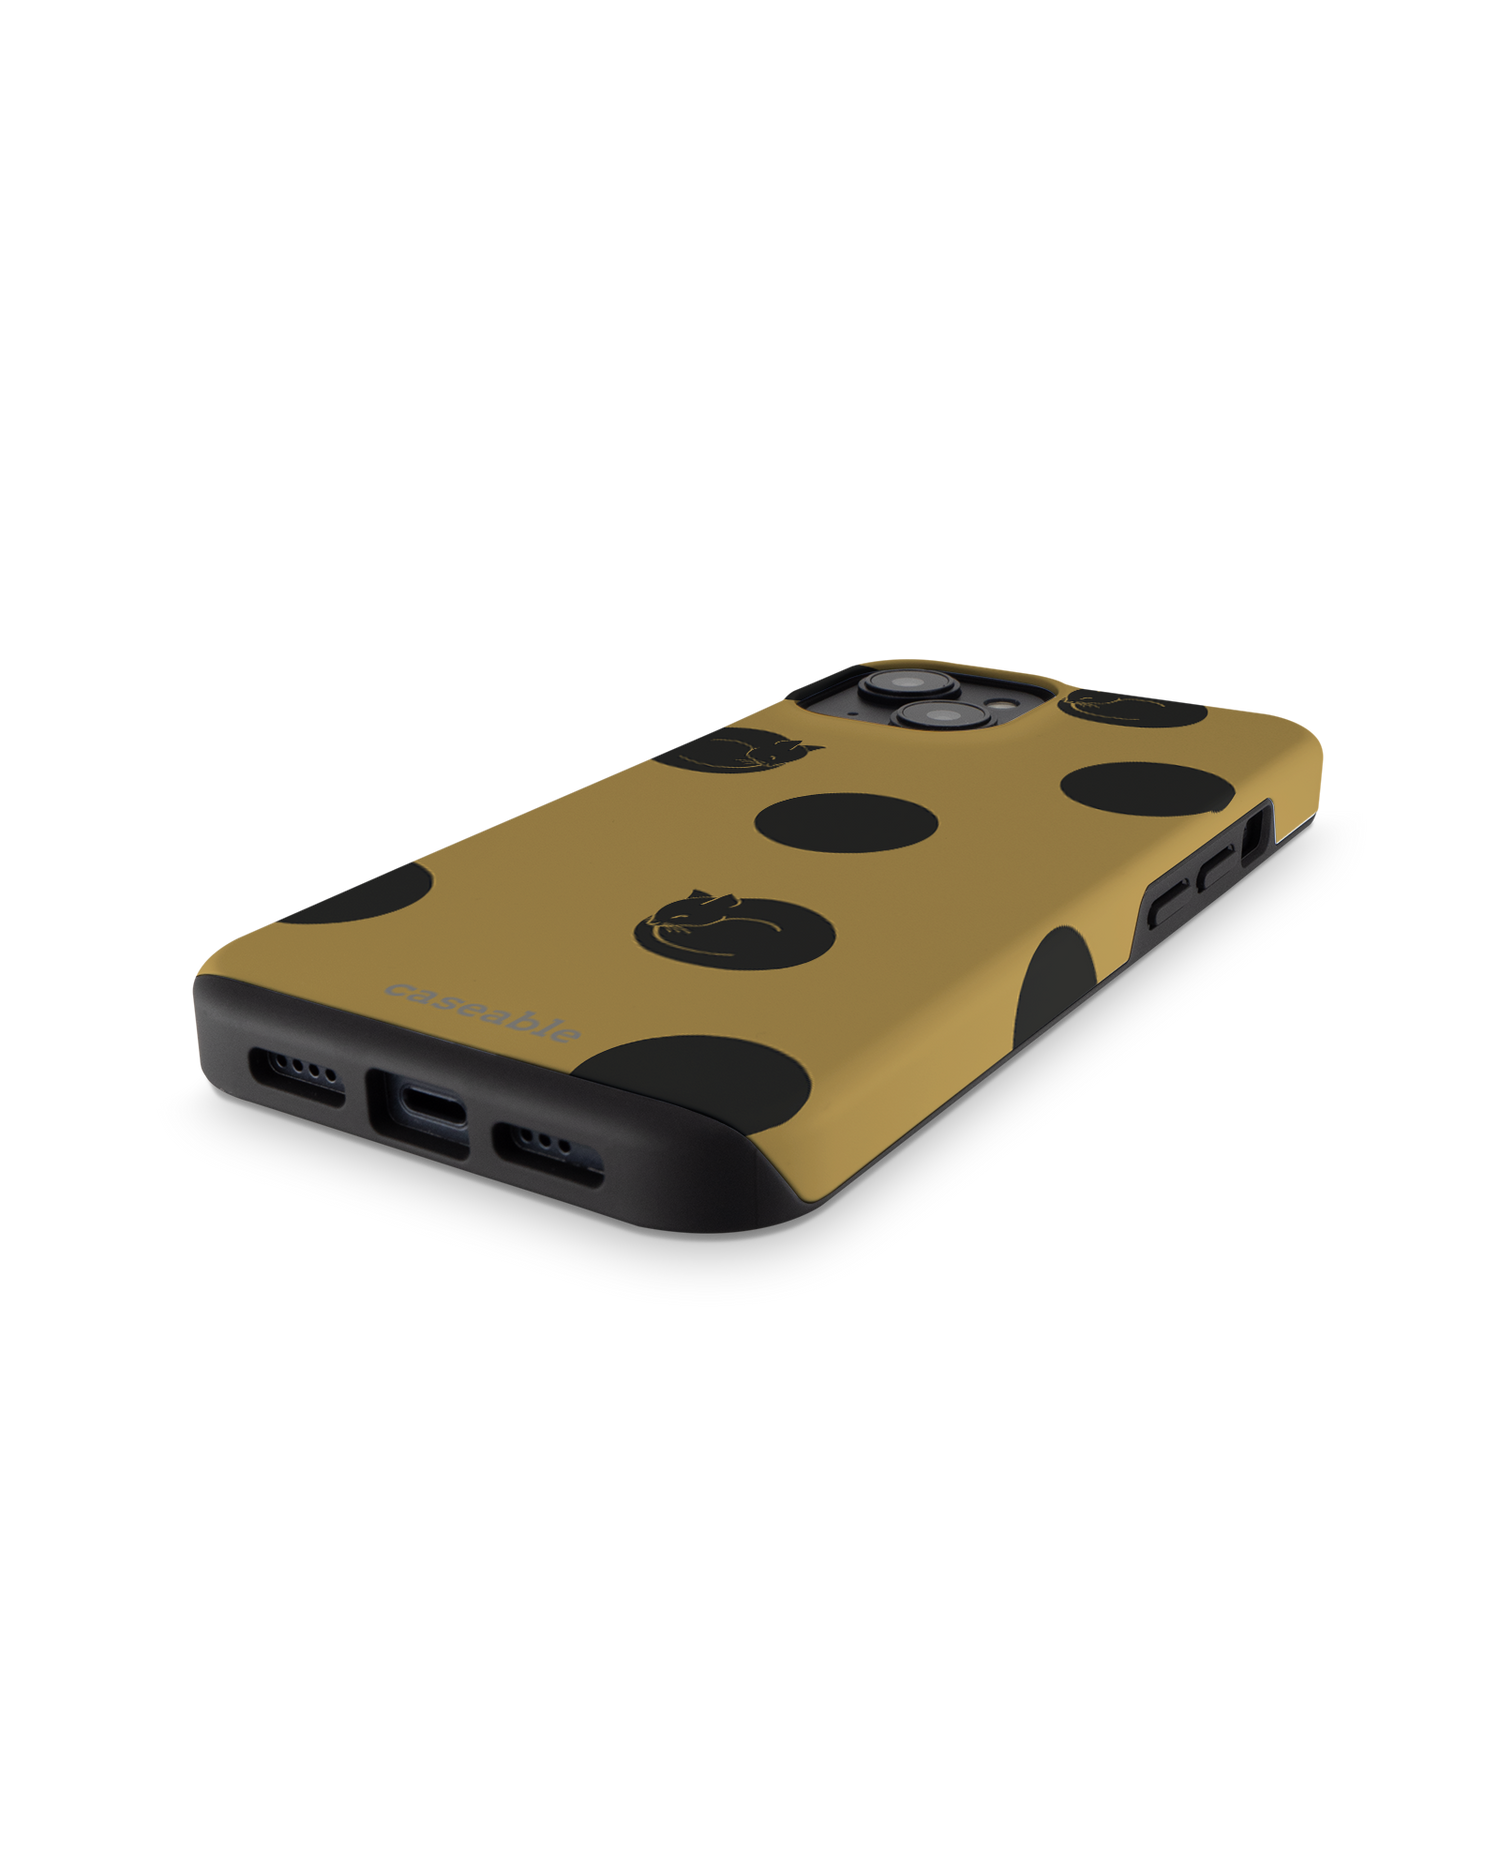 Polka Cats Premium Phone for Apple iPhone 14: Bottom View